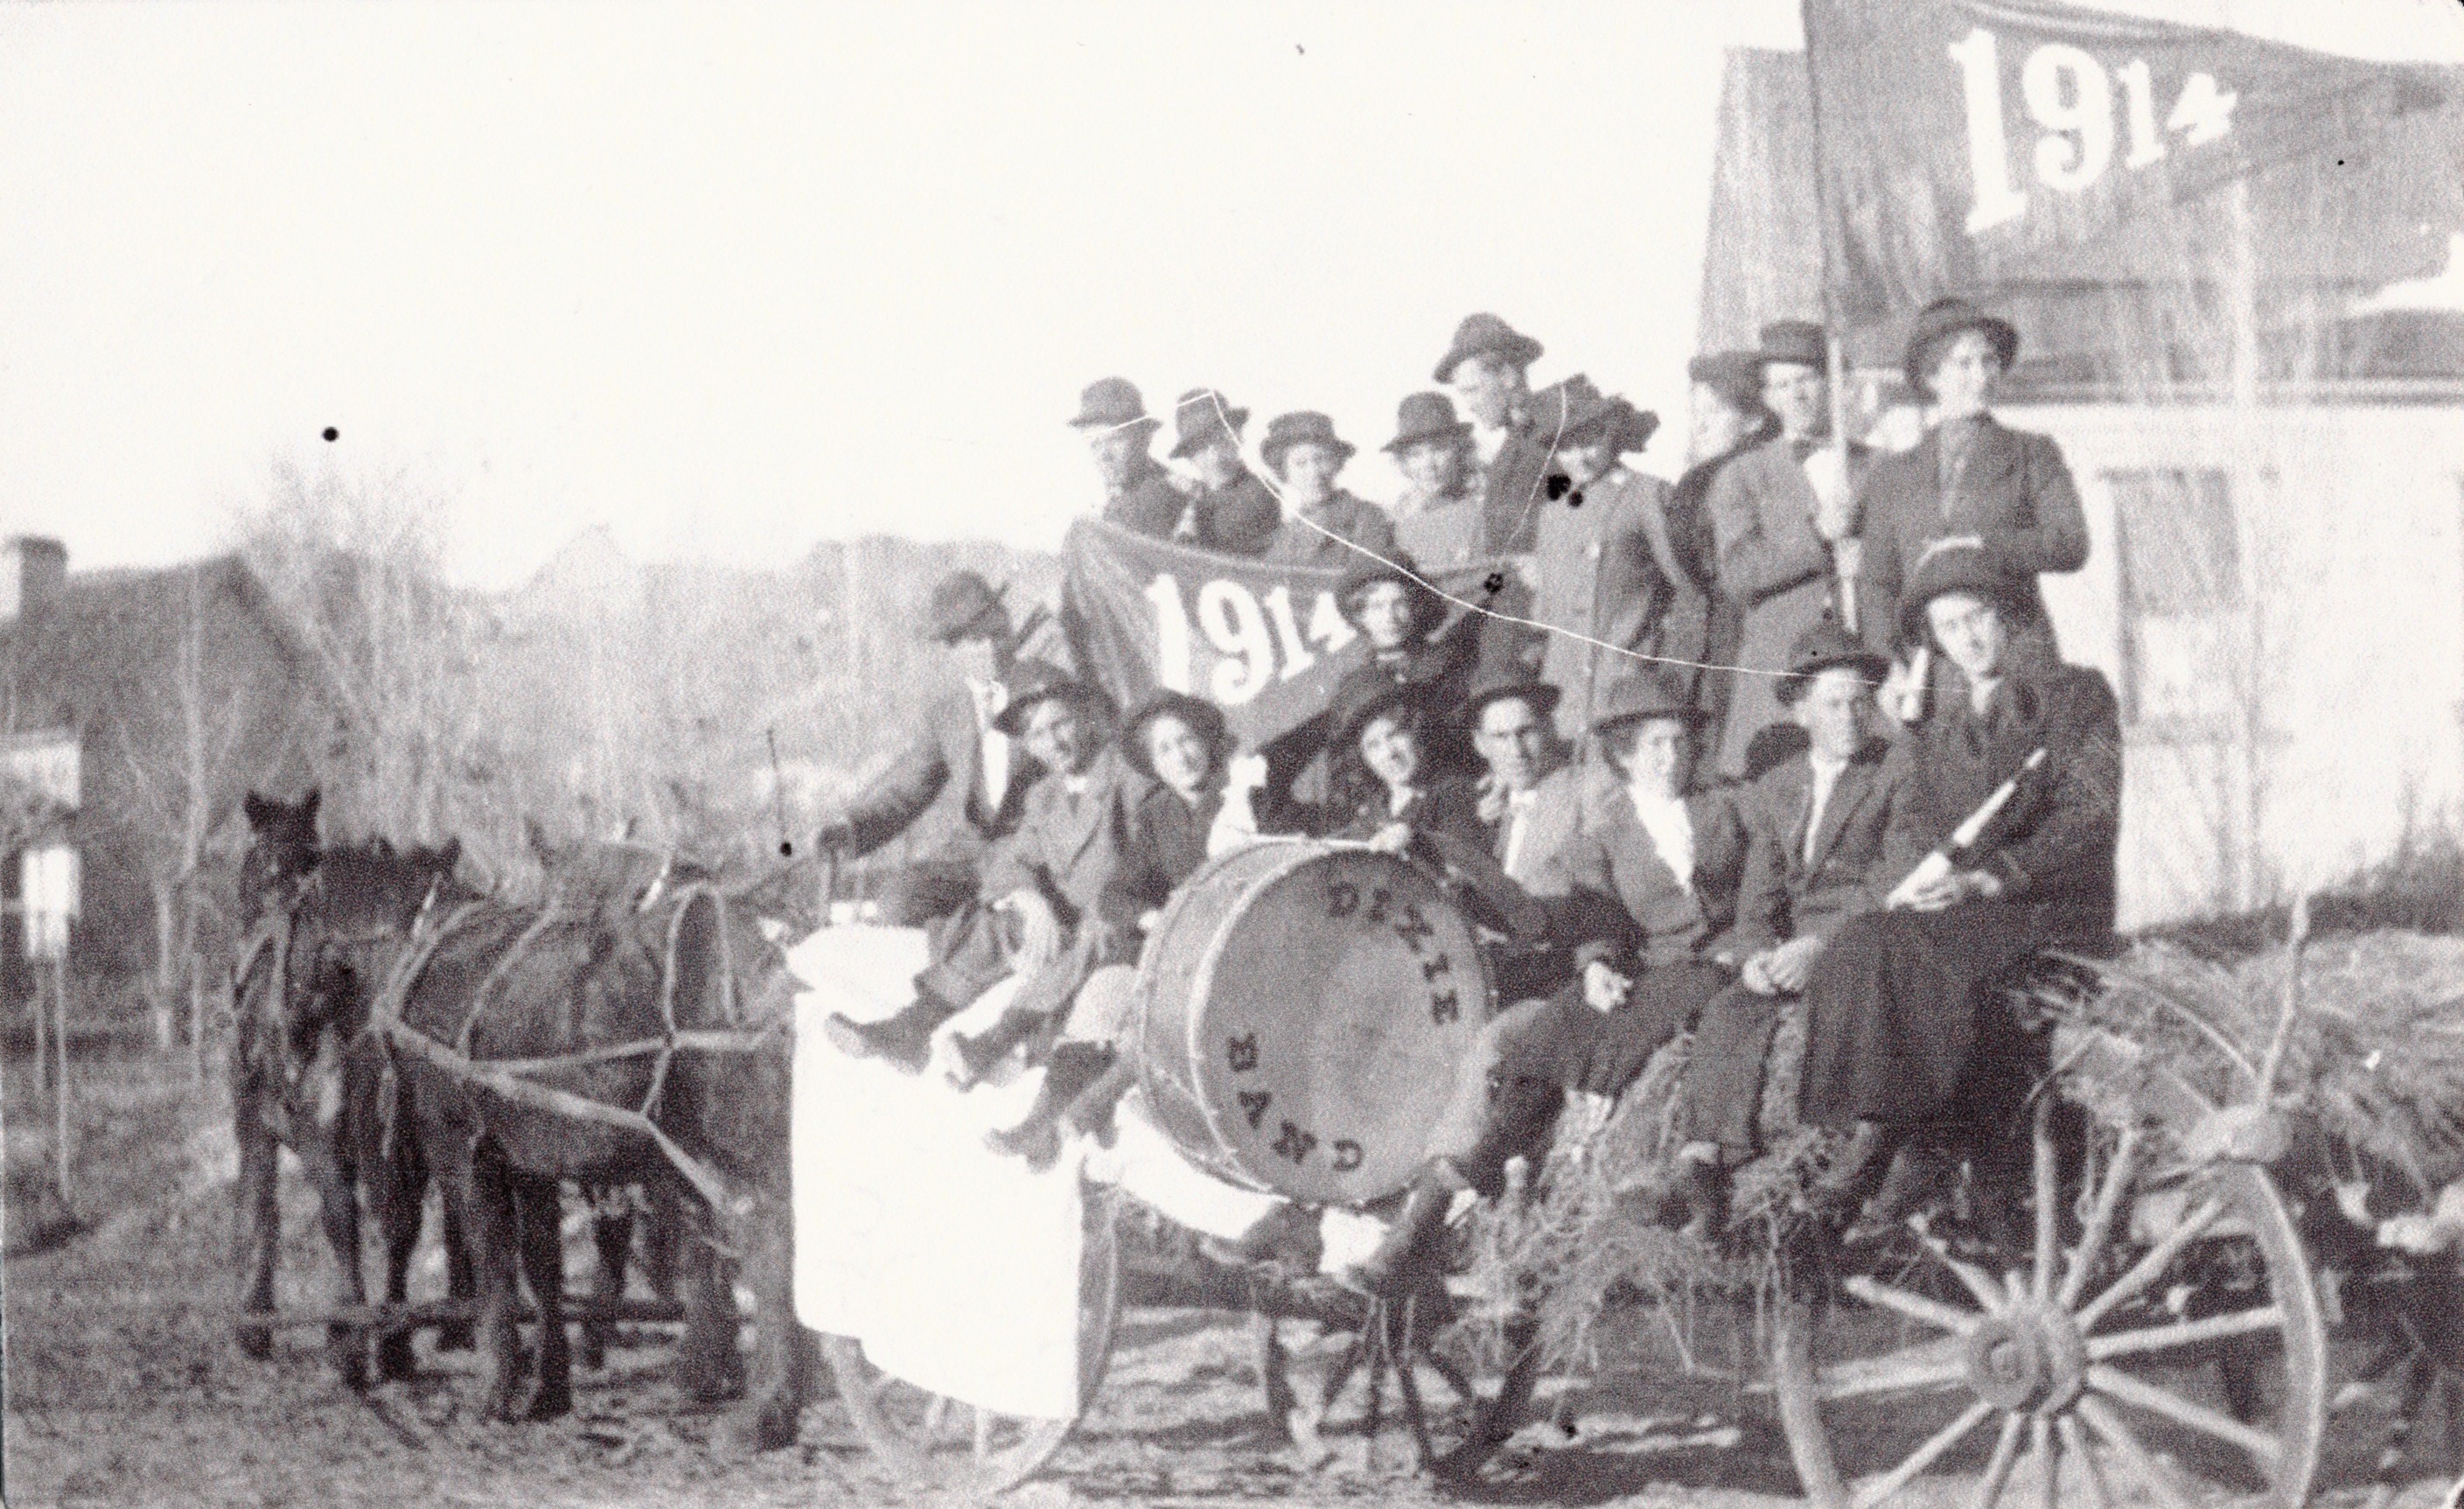 The Dixie Band 1914